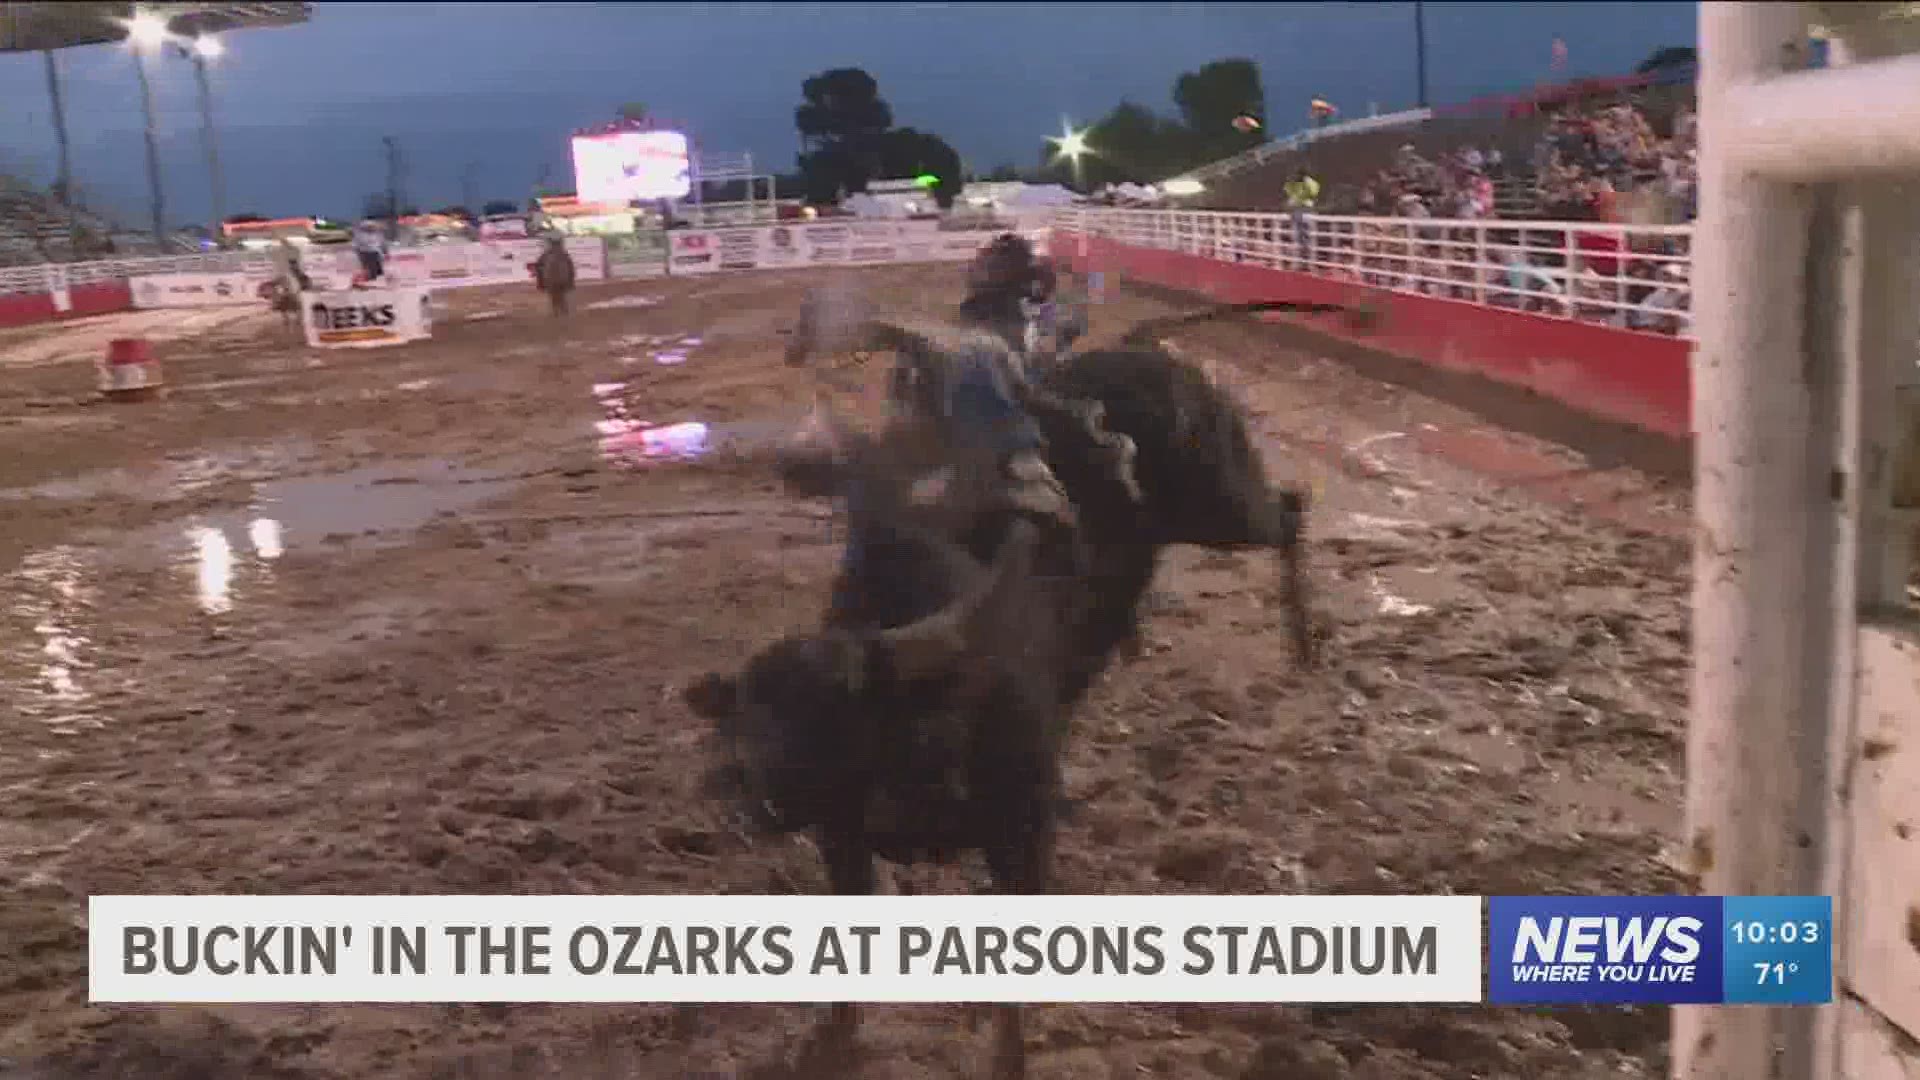 Despite the rain, professional bull riders were welcomed by a nearly filled Parsons Stadium as they fought for the chance to win $10,000.